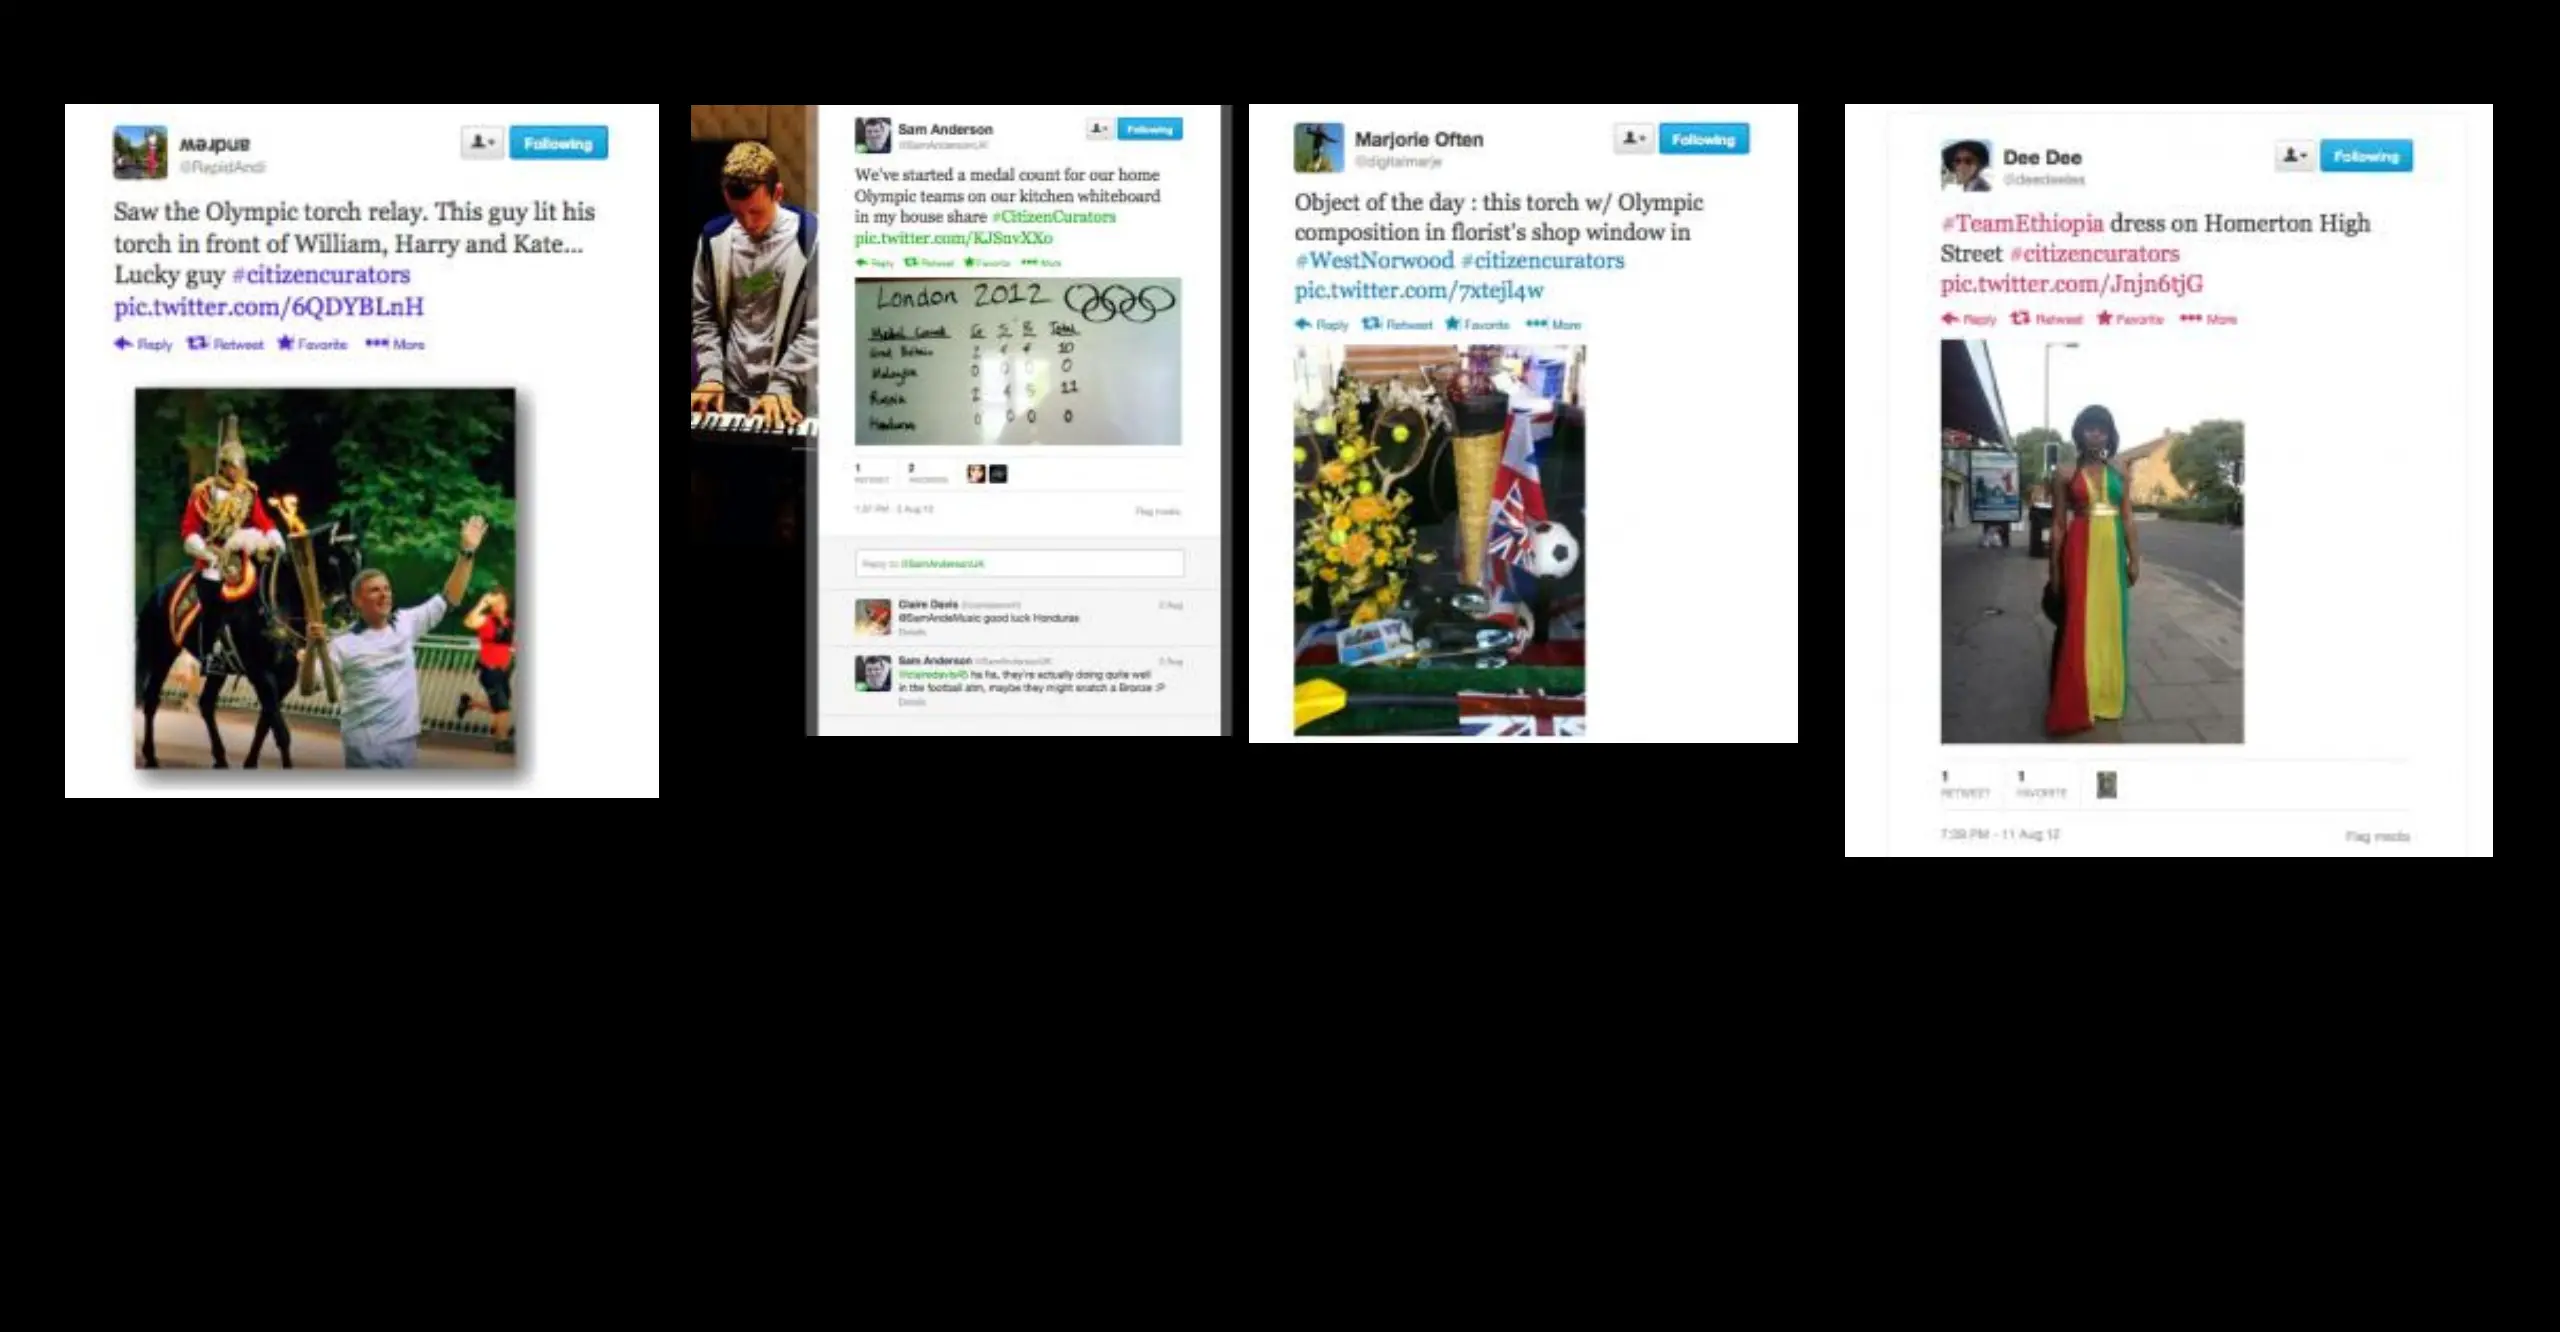 Four tweets about the London 2012 Olympics including #citizencurators over a black background